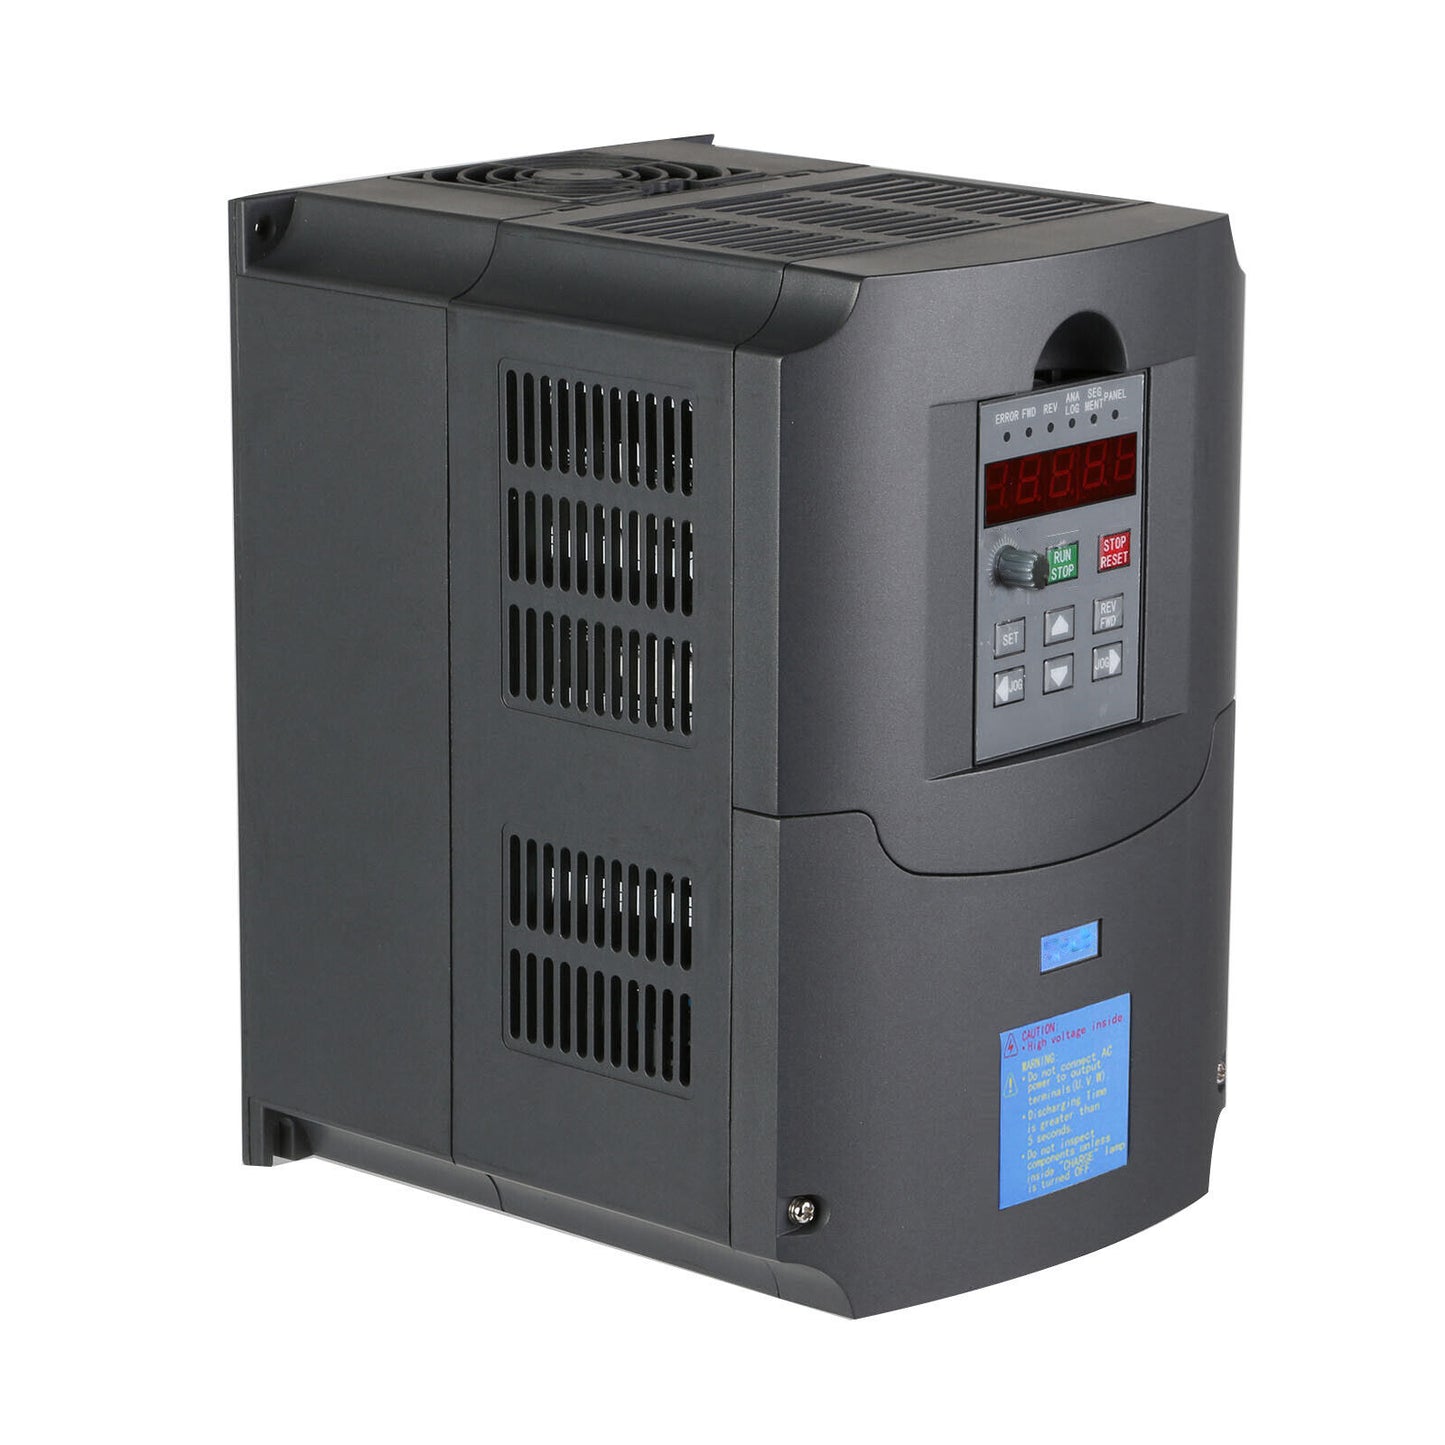 10HP 220V 7.5KW SINGLE PHASETO 3 PHASE VARIABLE FREQUENCY DRIVE VFD INVERTER